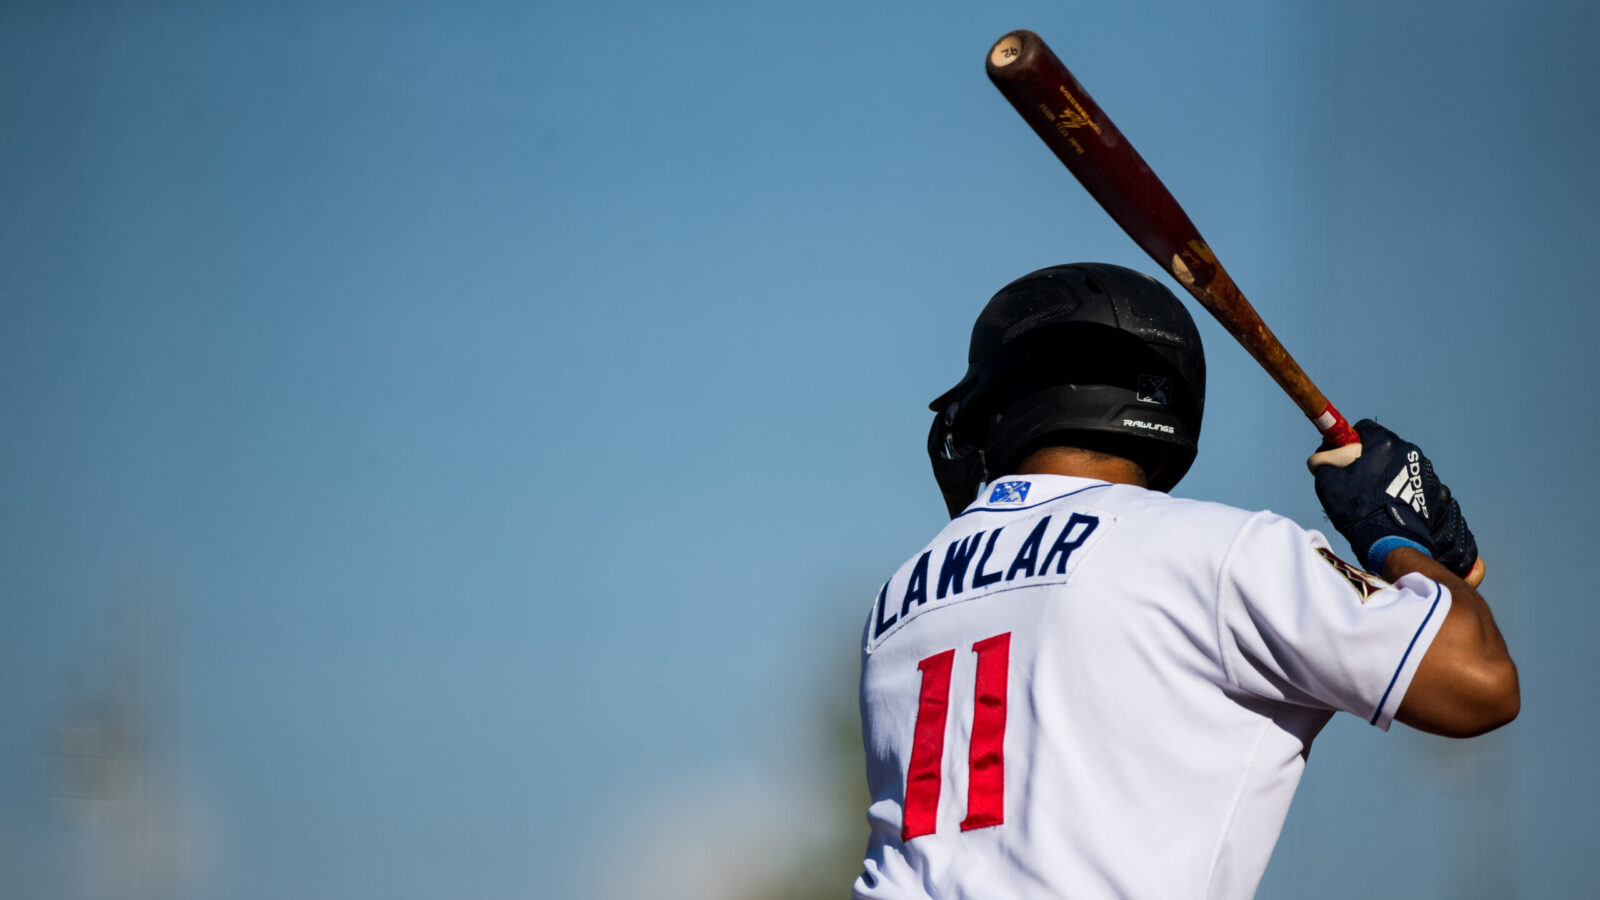 Jordan Lawlar #11 of the Amarillo Sod Poodles bats during the game against the Wichita Wind Surge a...